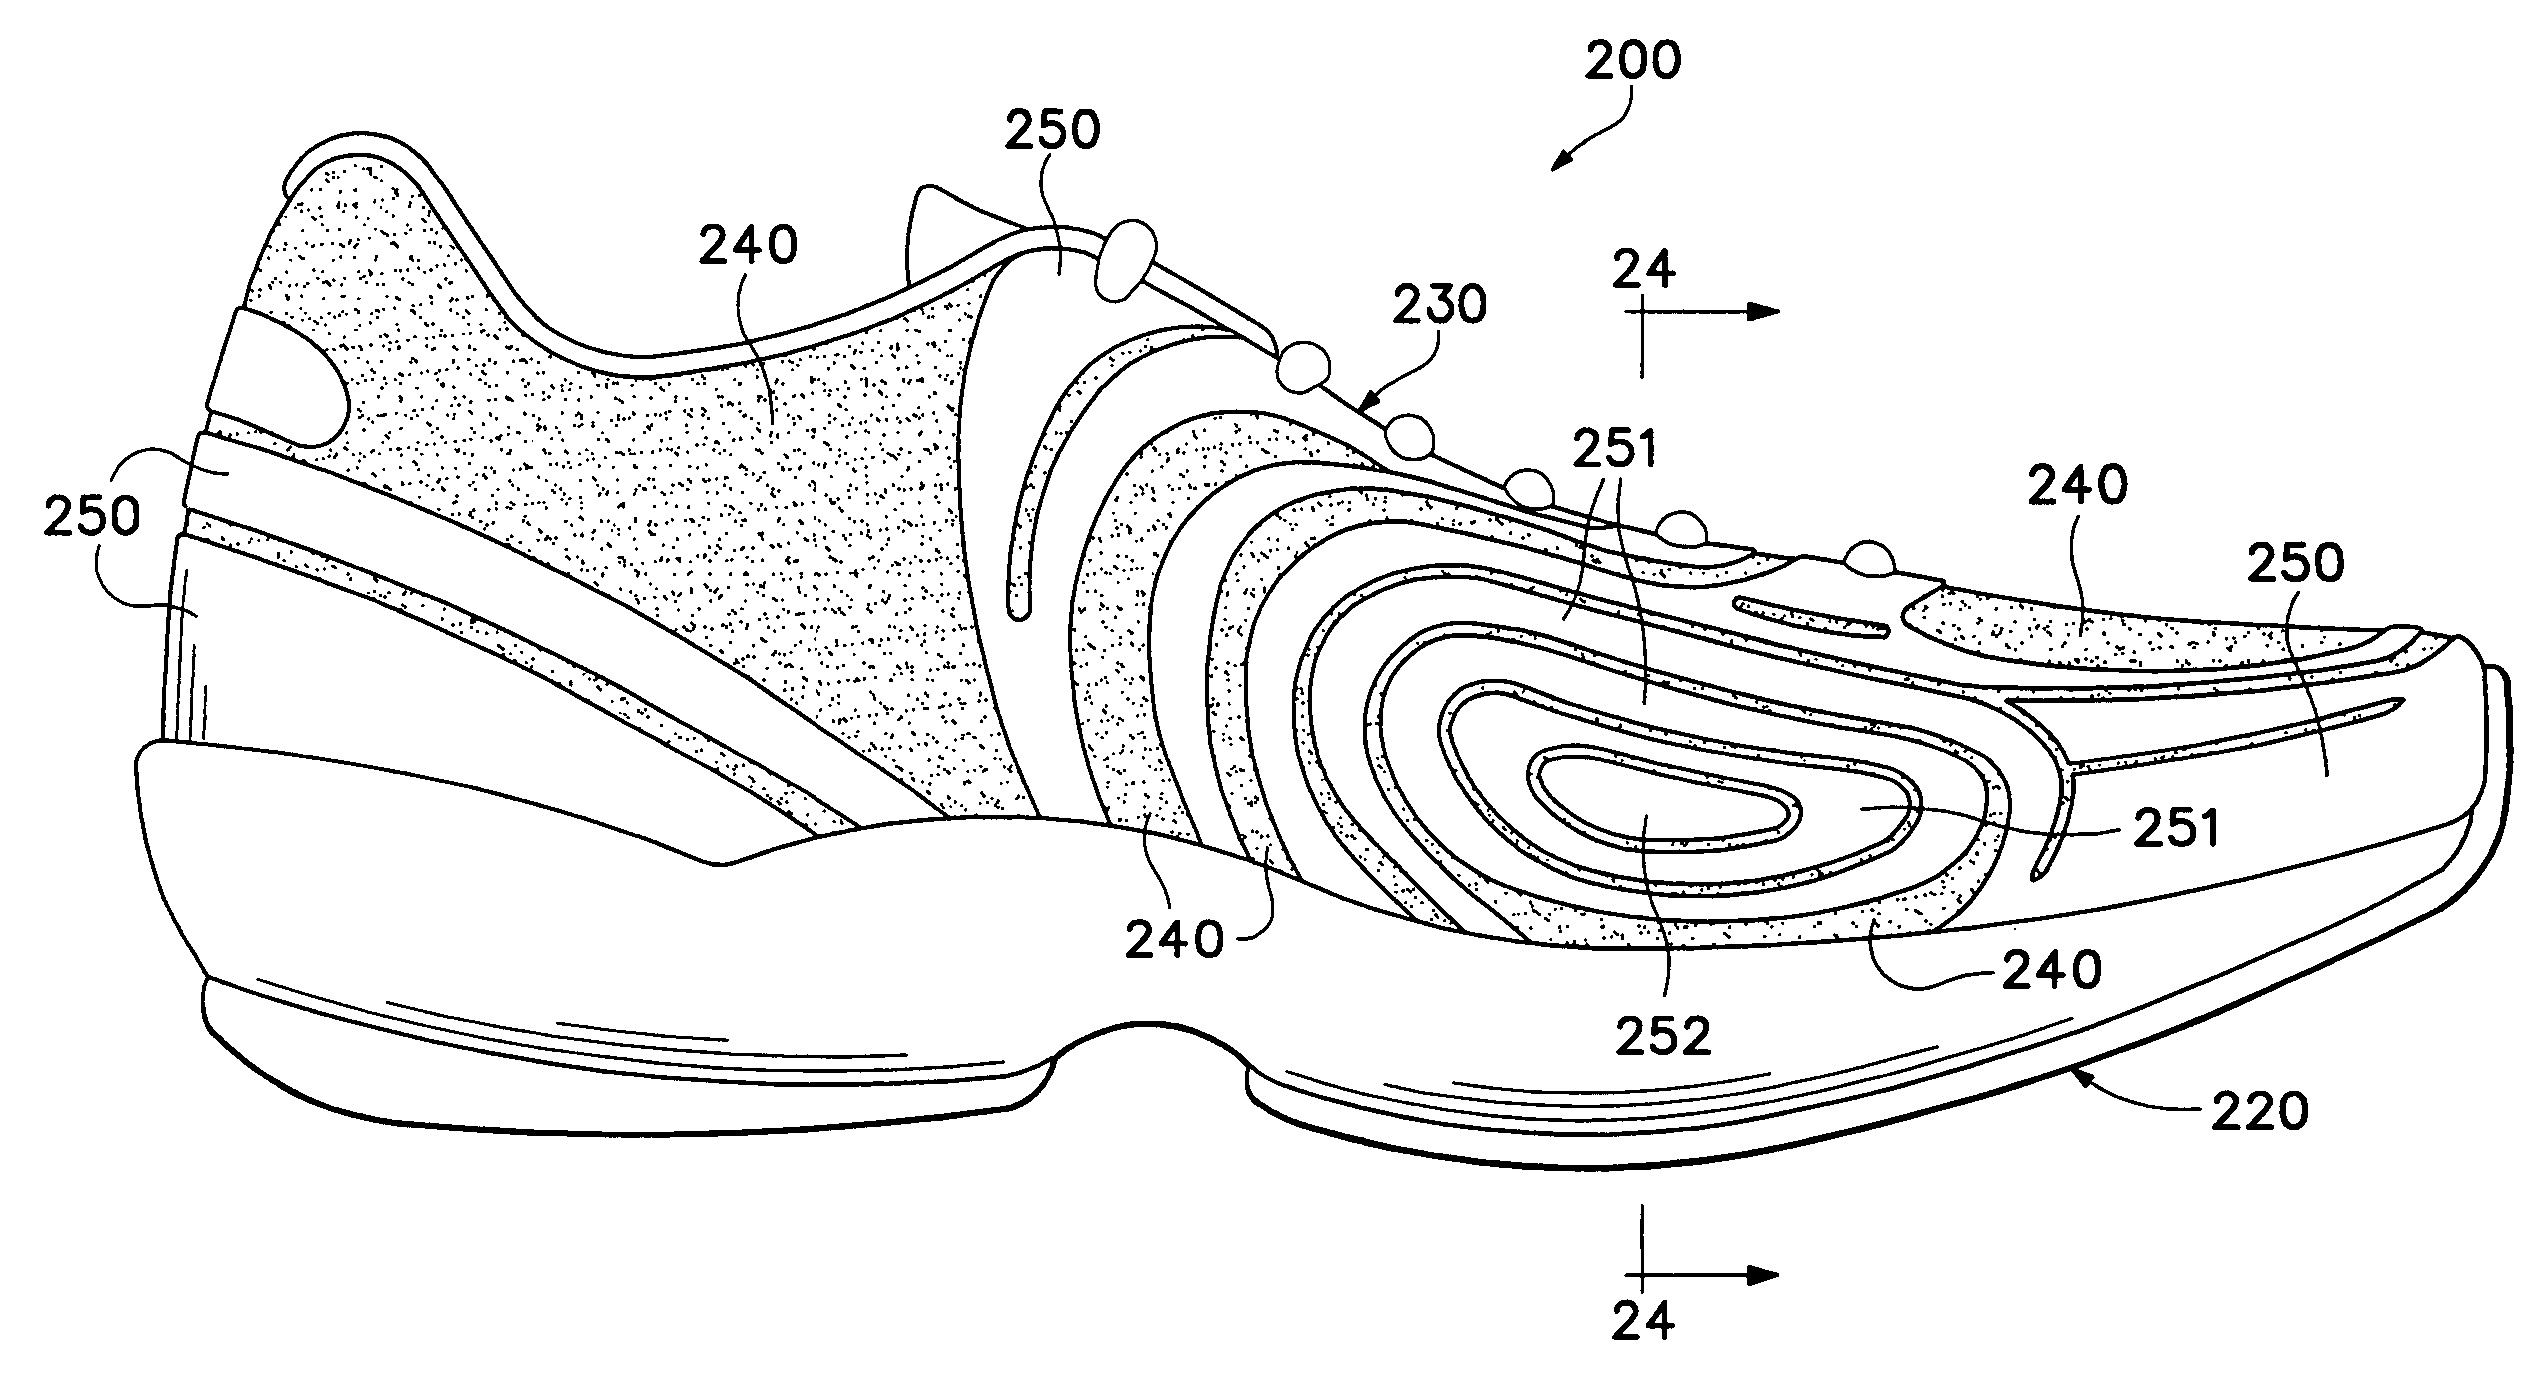 Article of apparel incorporating a stratified material